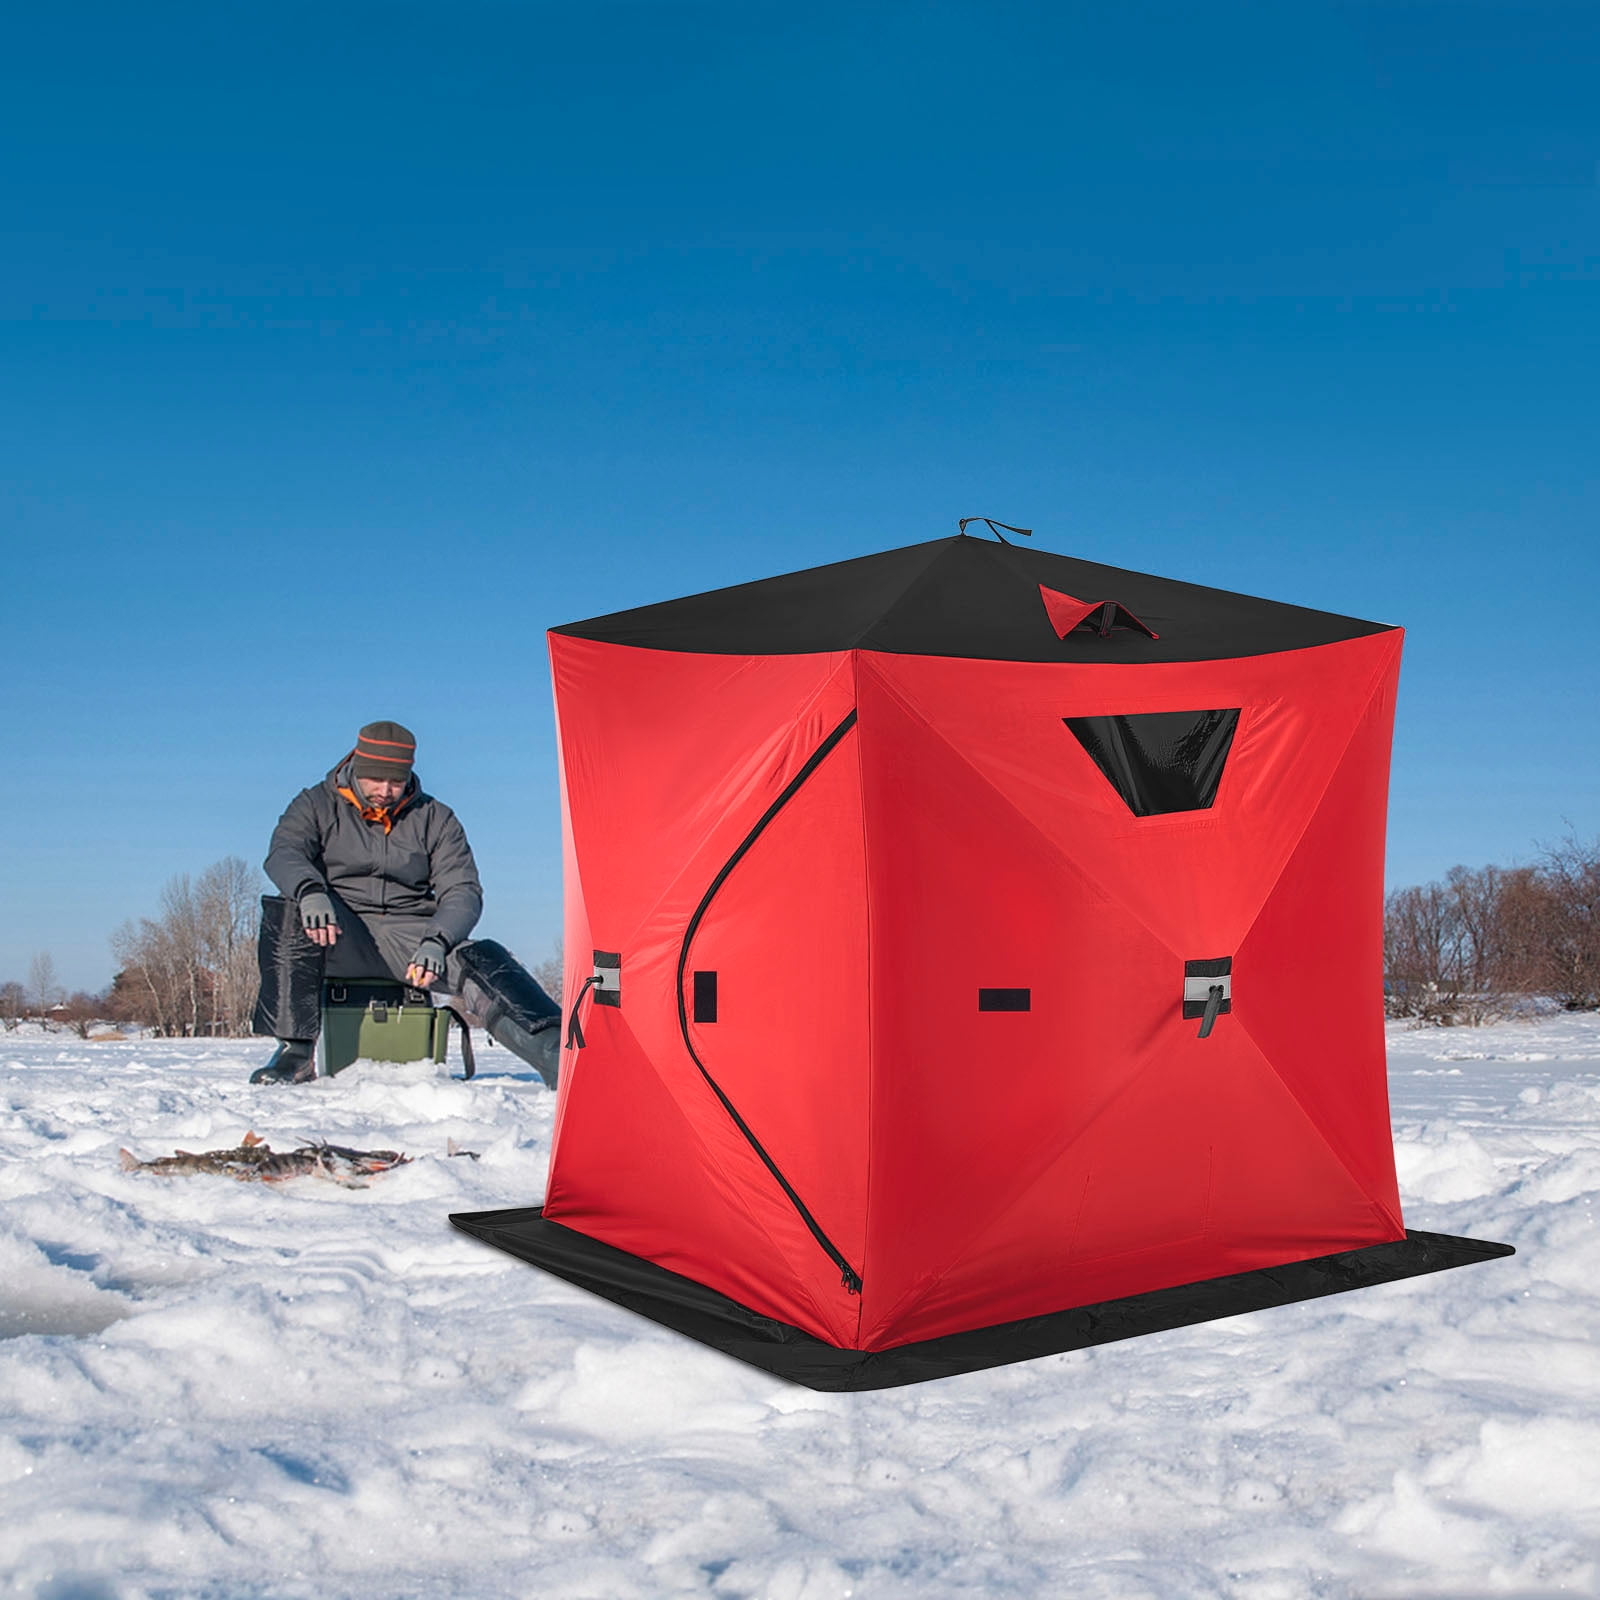 Eskimo QuickFish™ 2 Pop-up Portable Ice Fishing Shelter, Red, 2